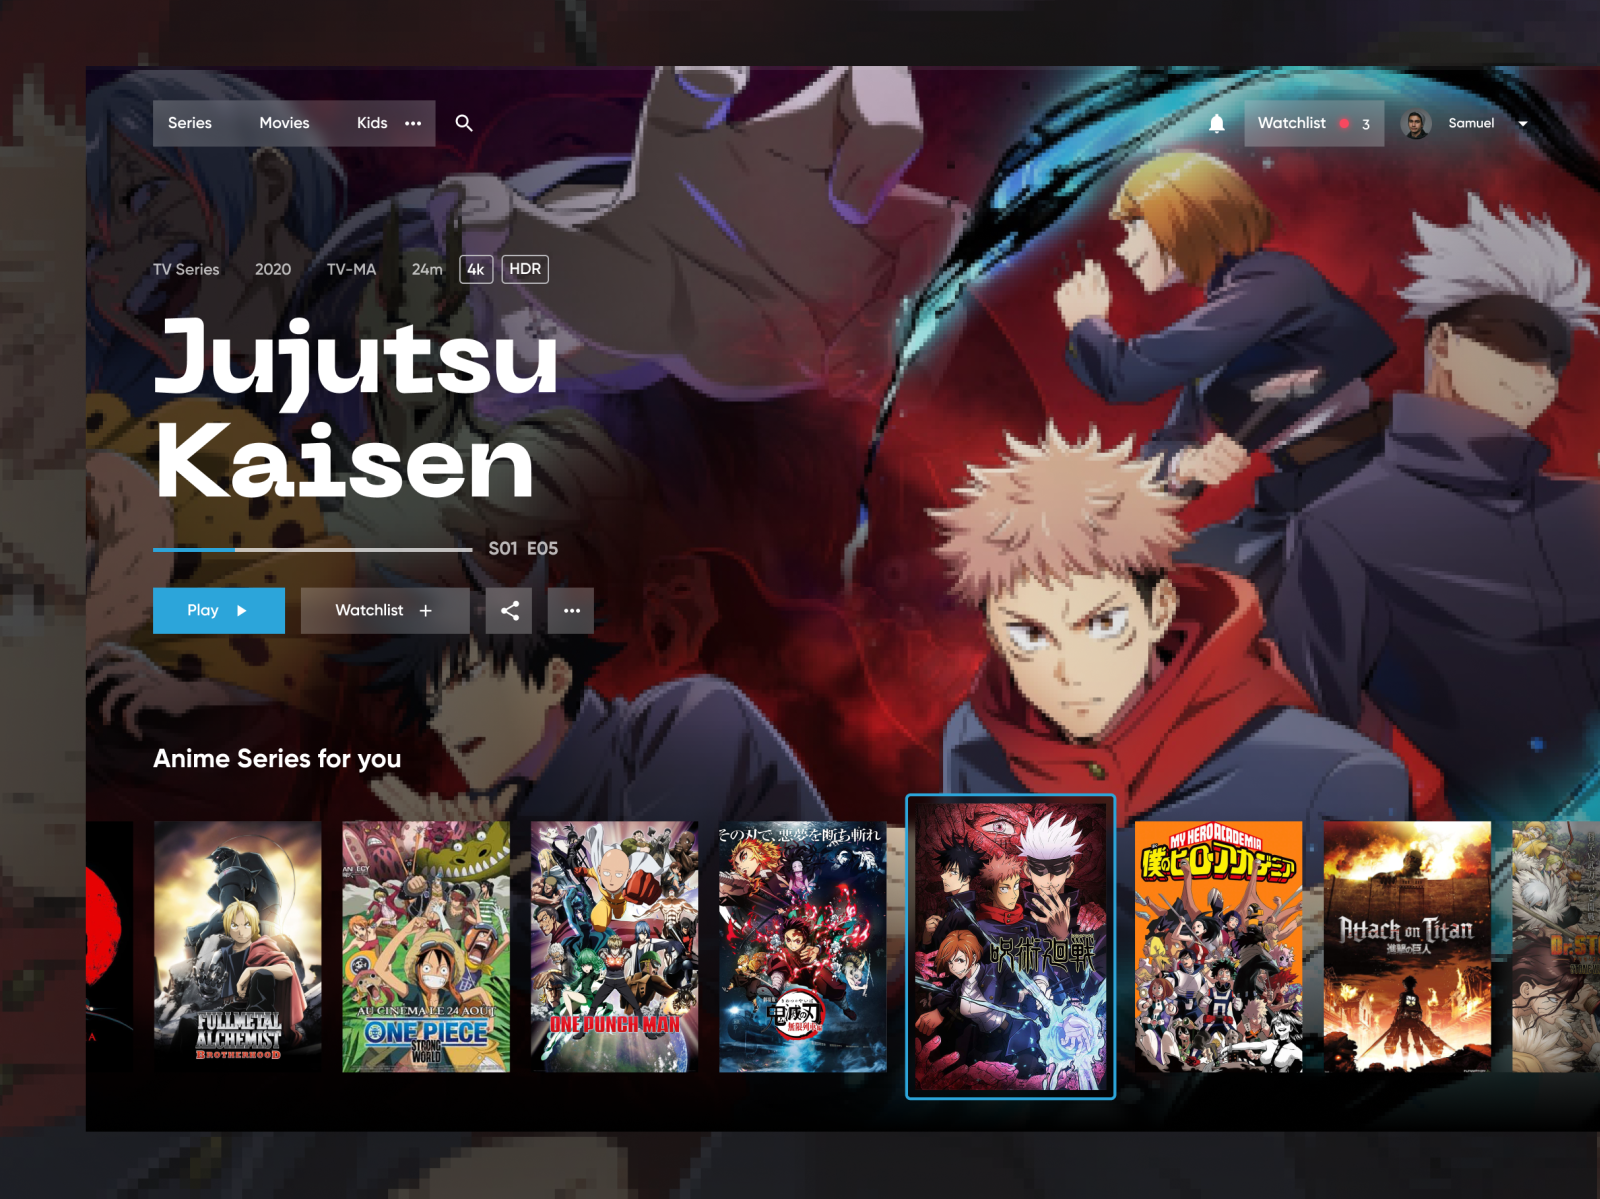 Hulu Inks Deal to Exclusively Distribute Funimation Anime Series | Decider